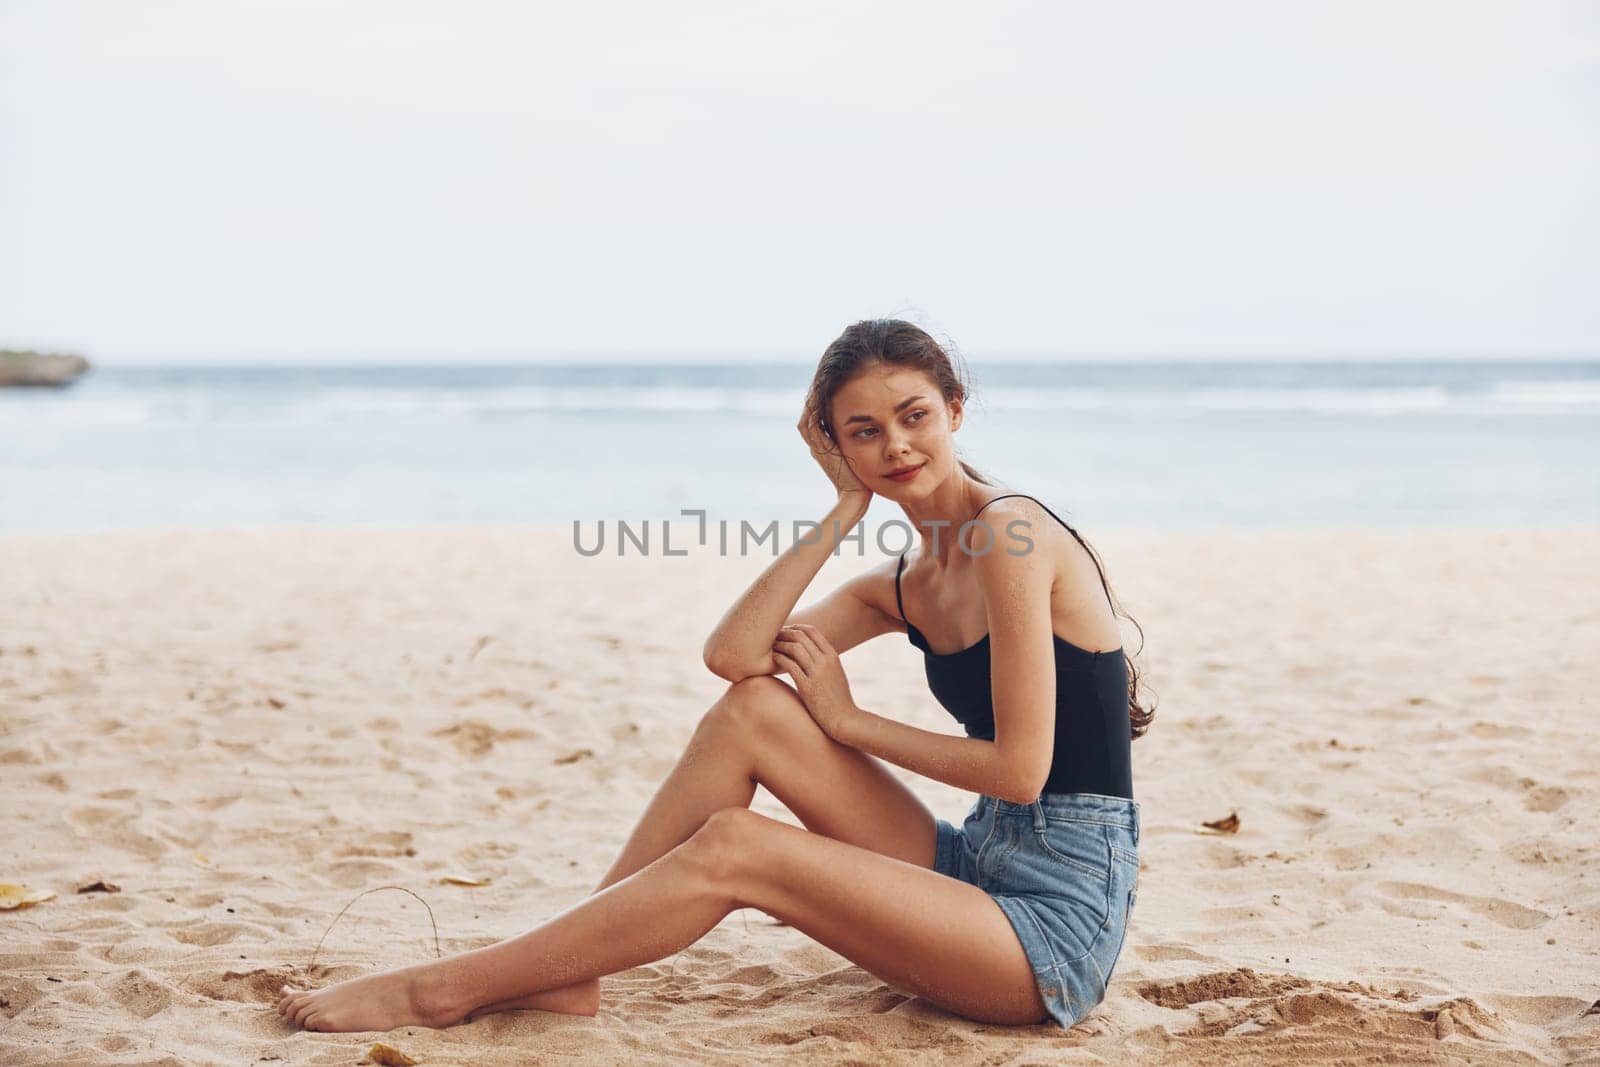 woman nature view bali freedom ocean relax carefree happy back sand sitting vacation girl fashion sea water adult smile beach travel tropical